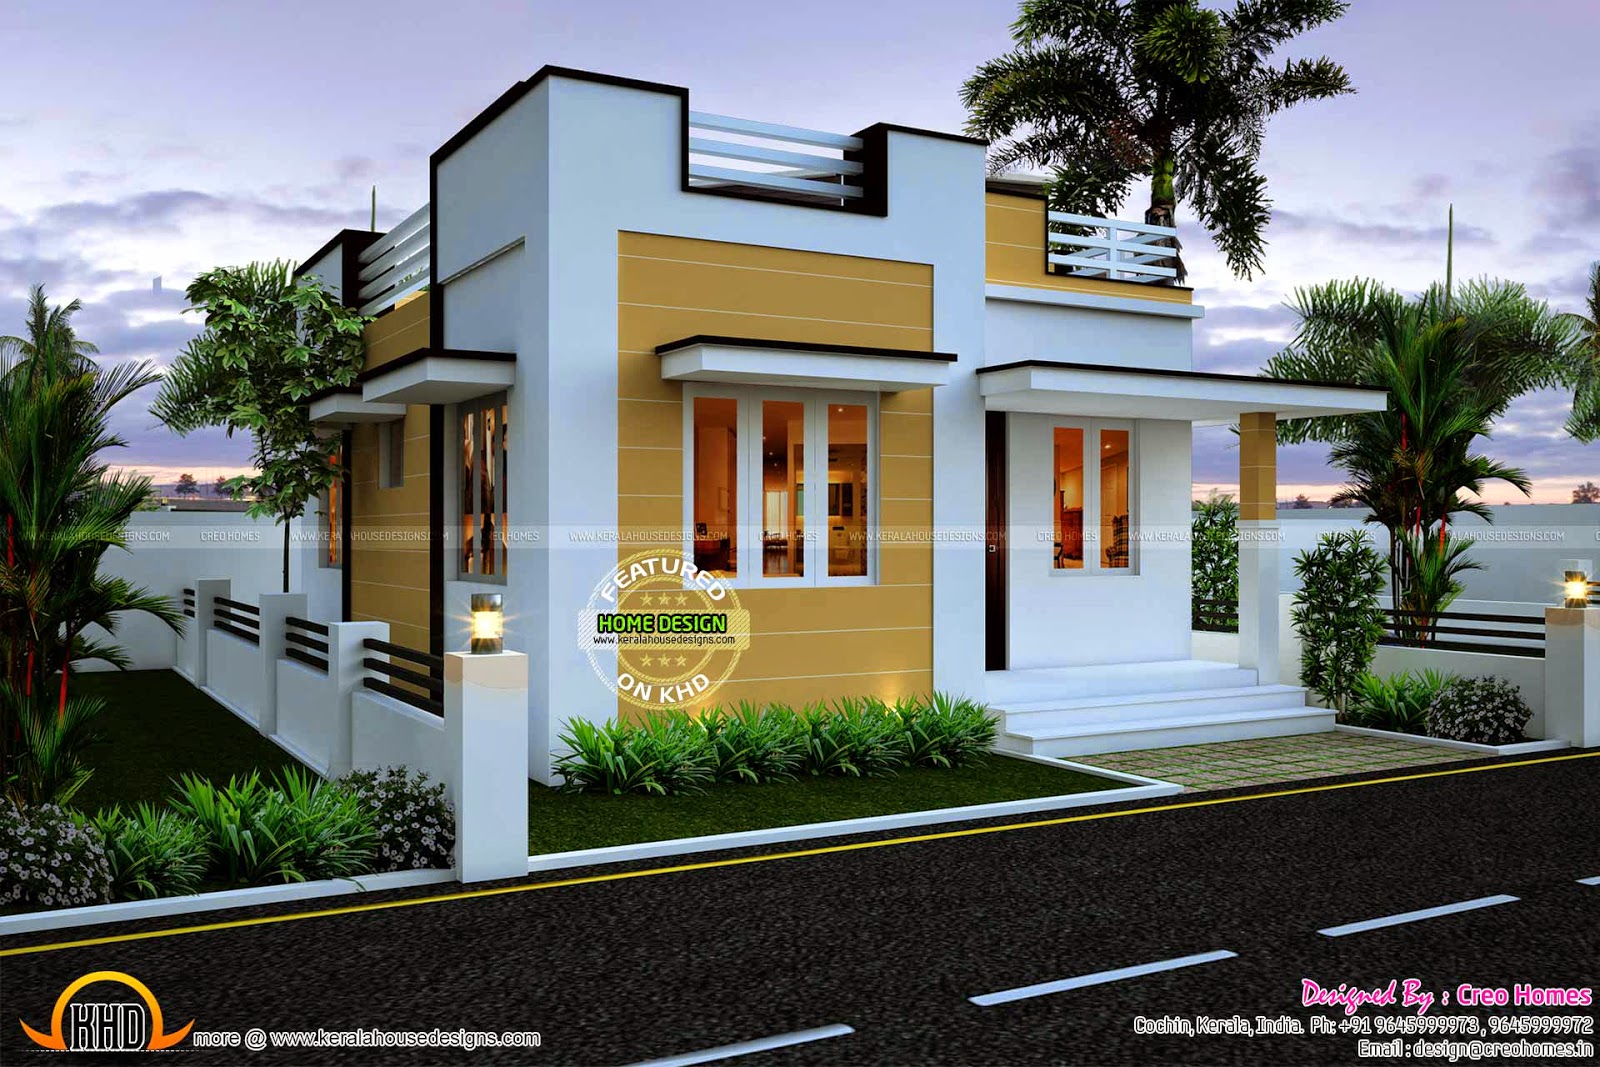  House  Plans  and Design  Home  Plans  In Kerala Below 5 Lakhs